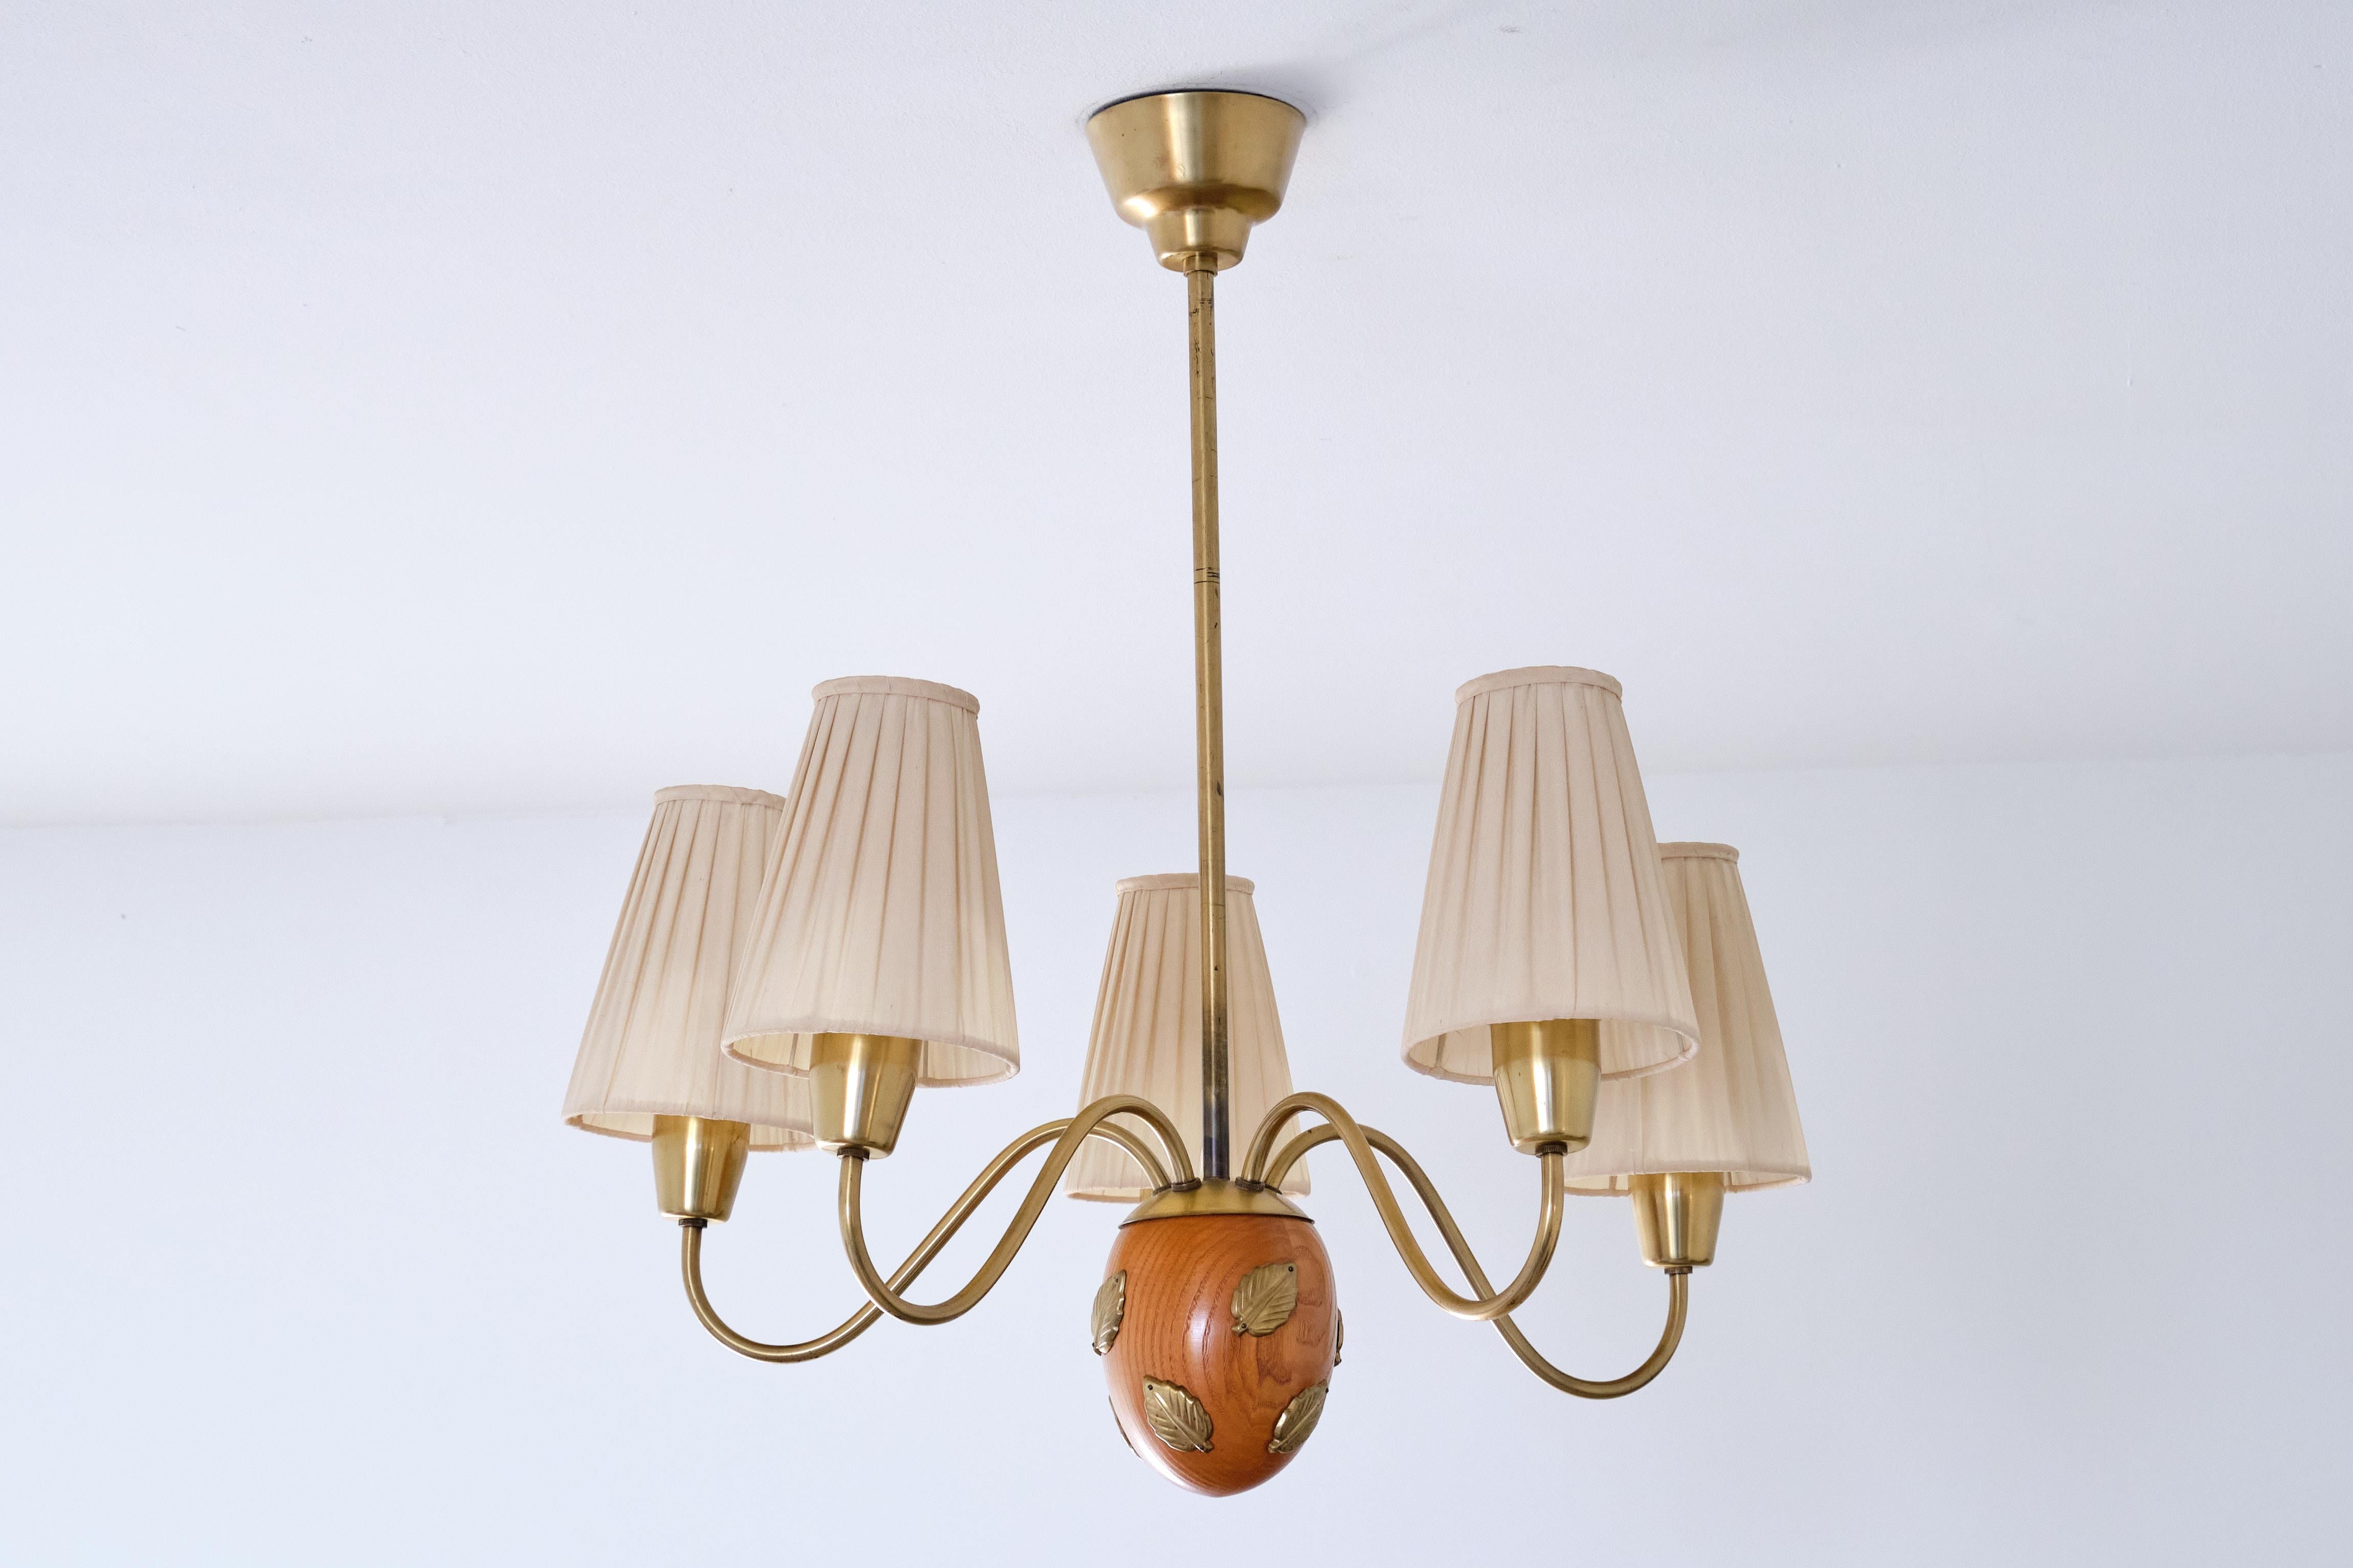 This rare five arm chandelier was designed by Hans Bergström and produced by his company Ateljé Lyktan in the late 1940s. This particular model was numbered '10/5'.

The chandelier features five curved brass arms mounted on top of a sculptural